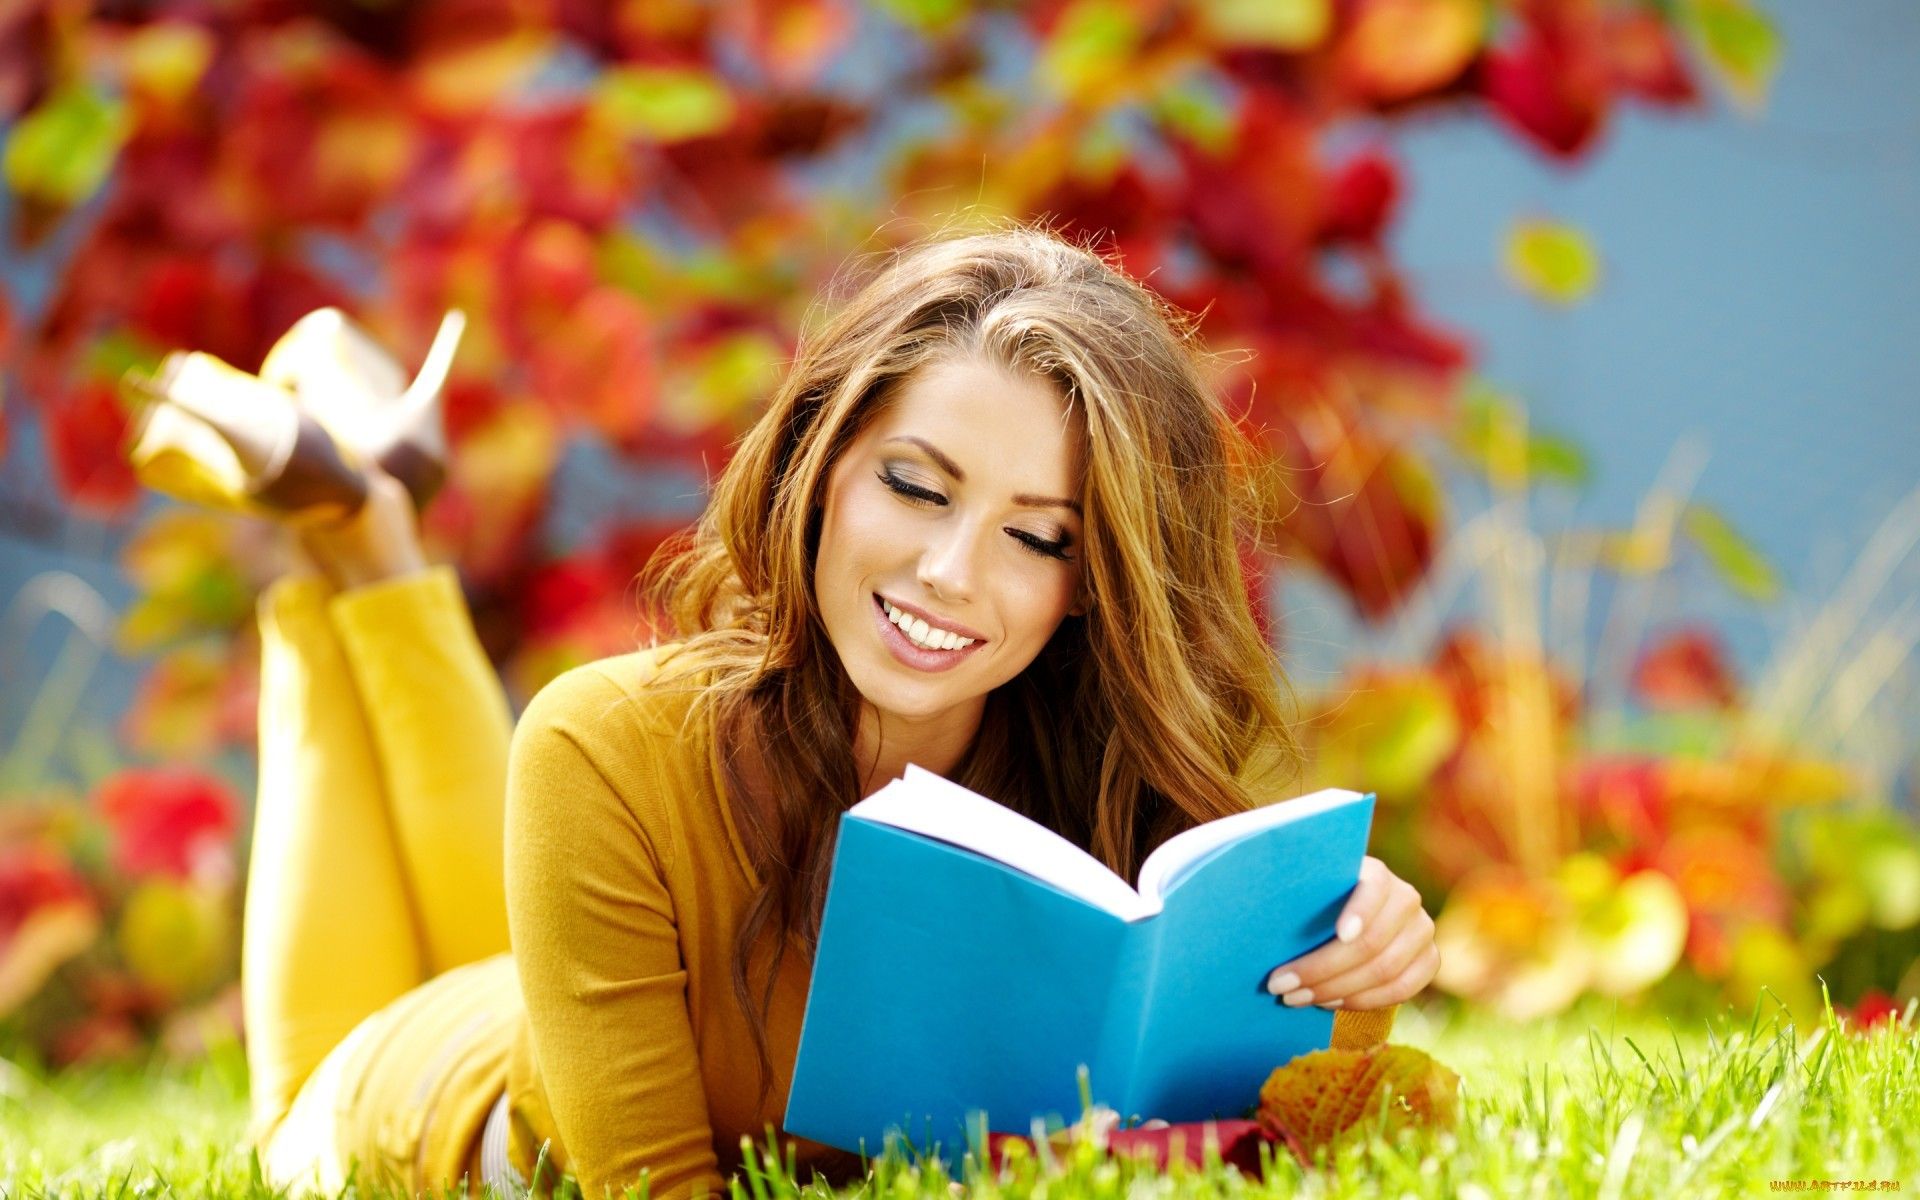 women, trees, reading, books, girls in nature, legs up, read a book wallpaper